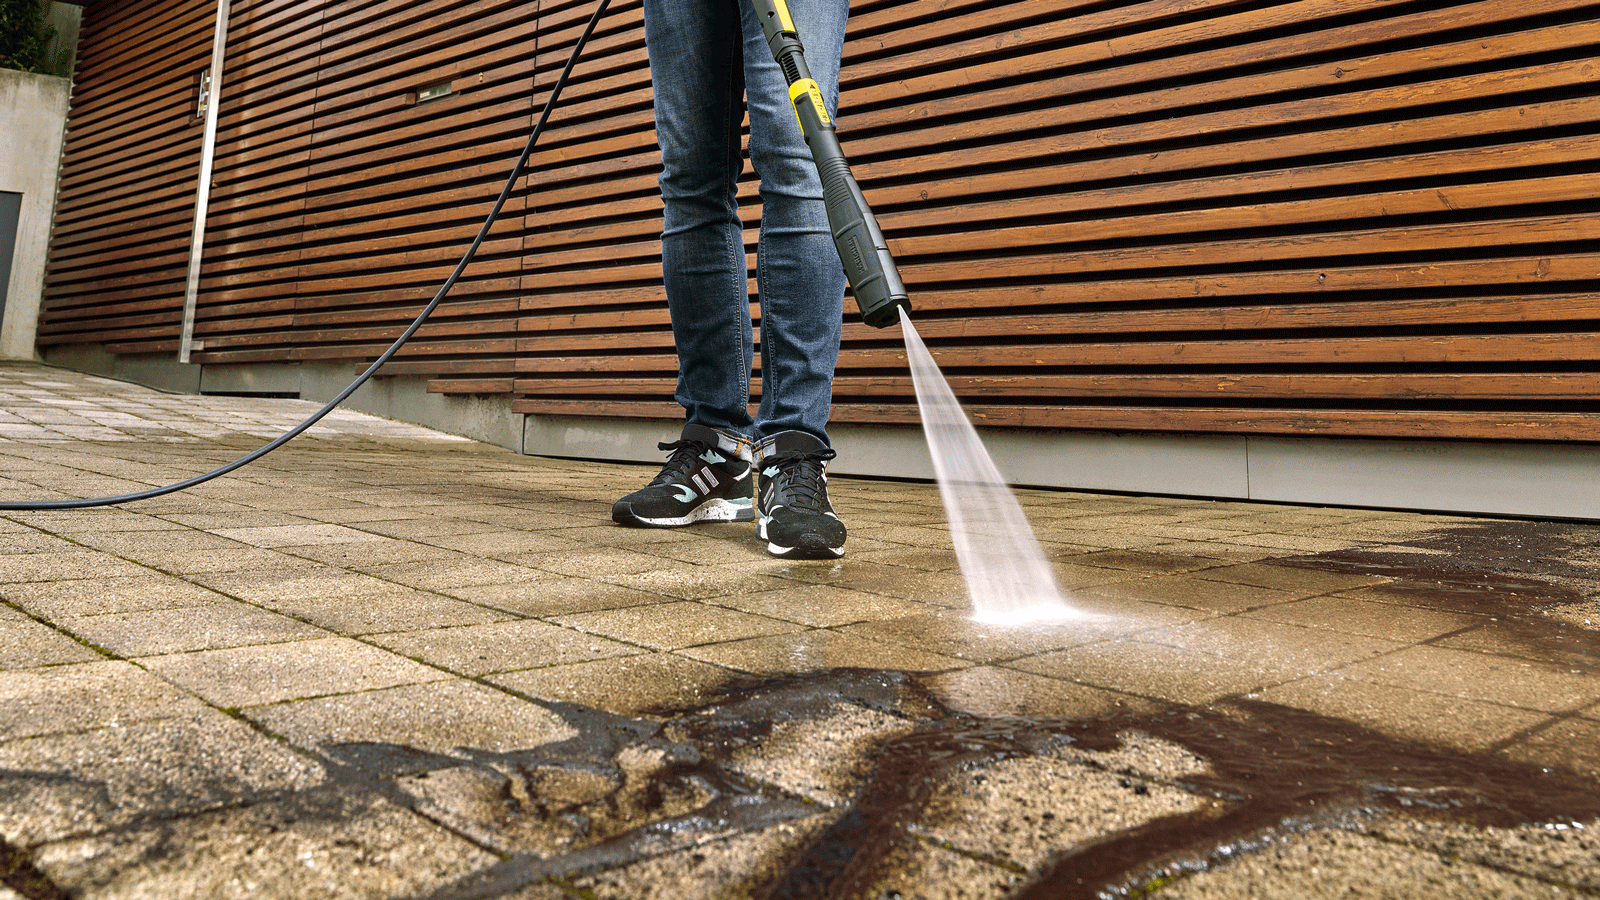 Pressure Washer To Remove Weeds, How To Use A Pressure Washer Clean Patio